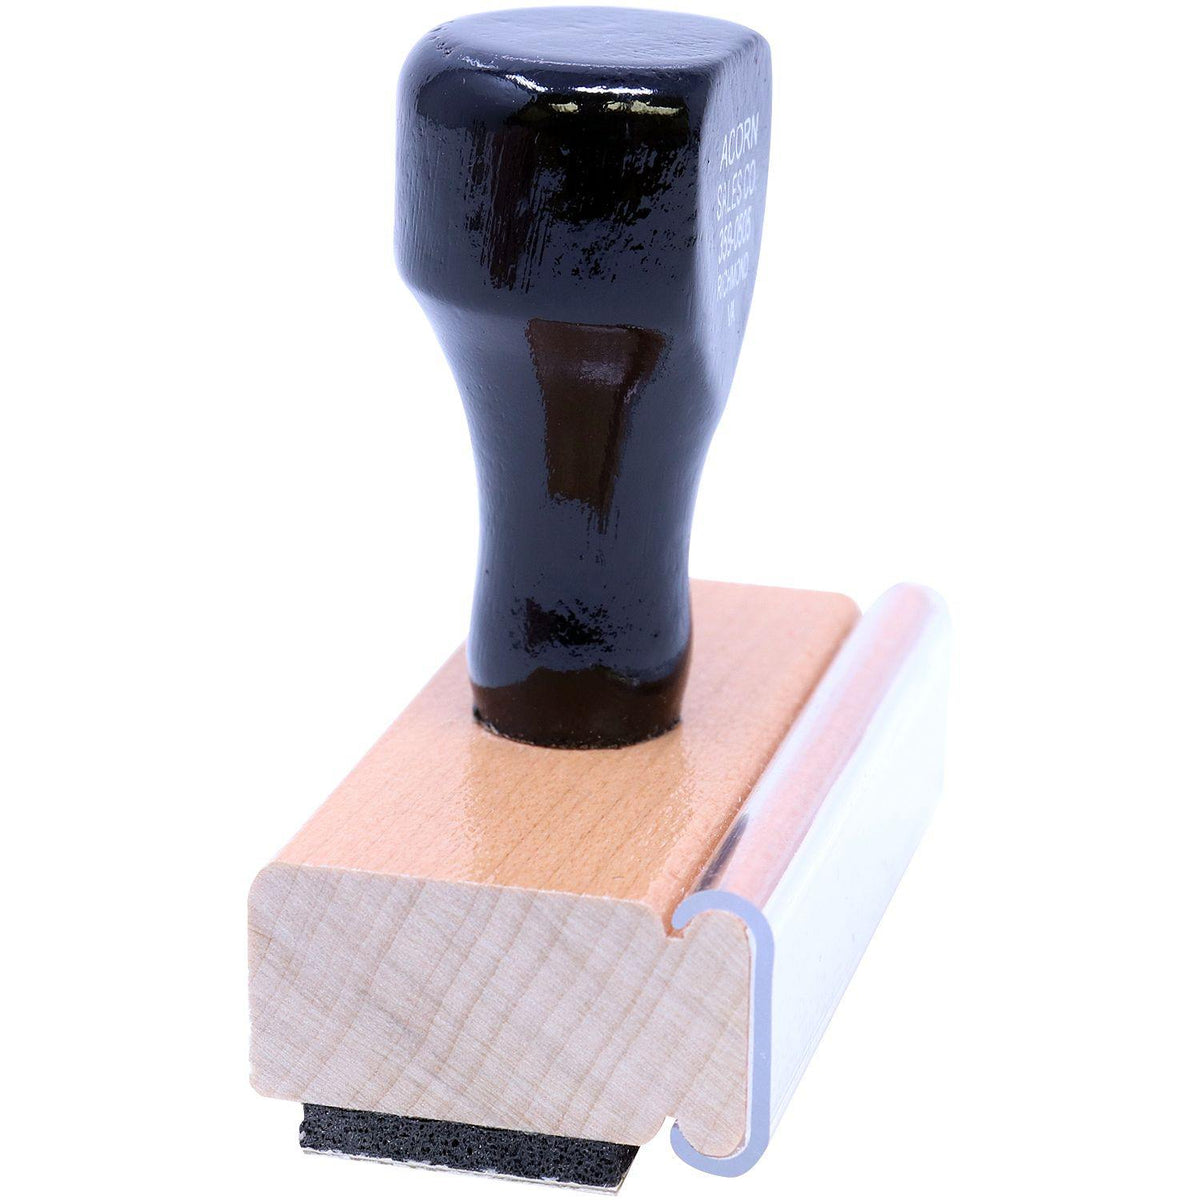 Side View of Large Outline Approved Rubber Stamp at an Angle